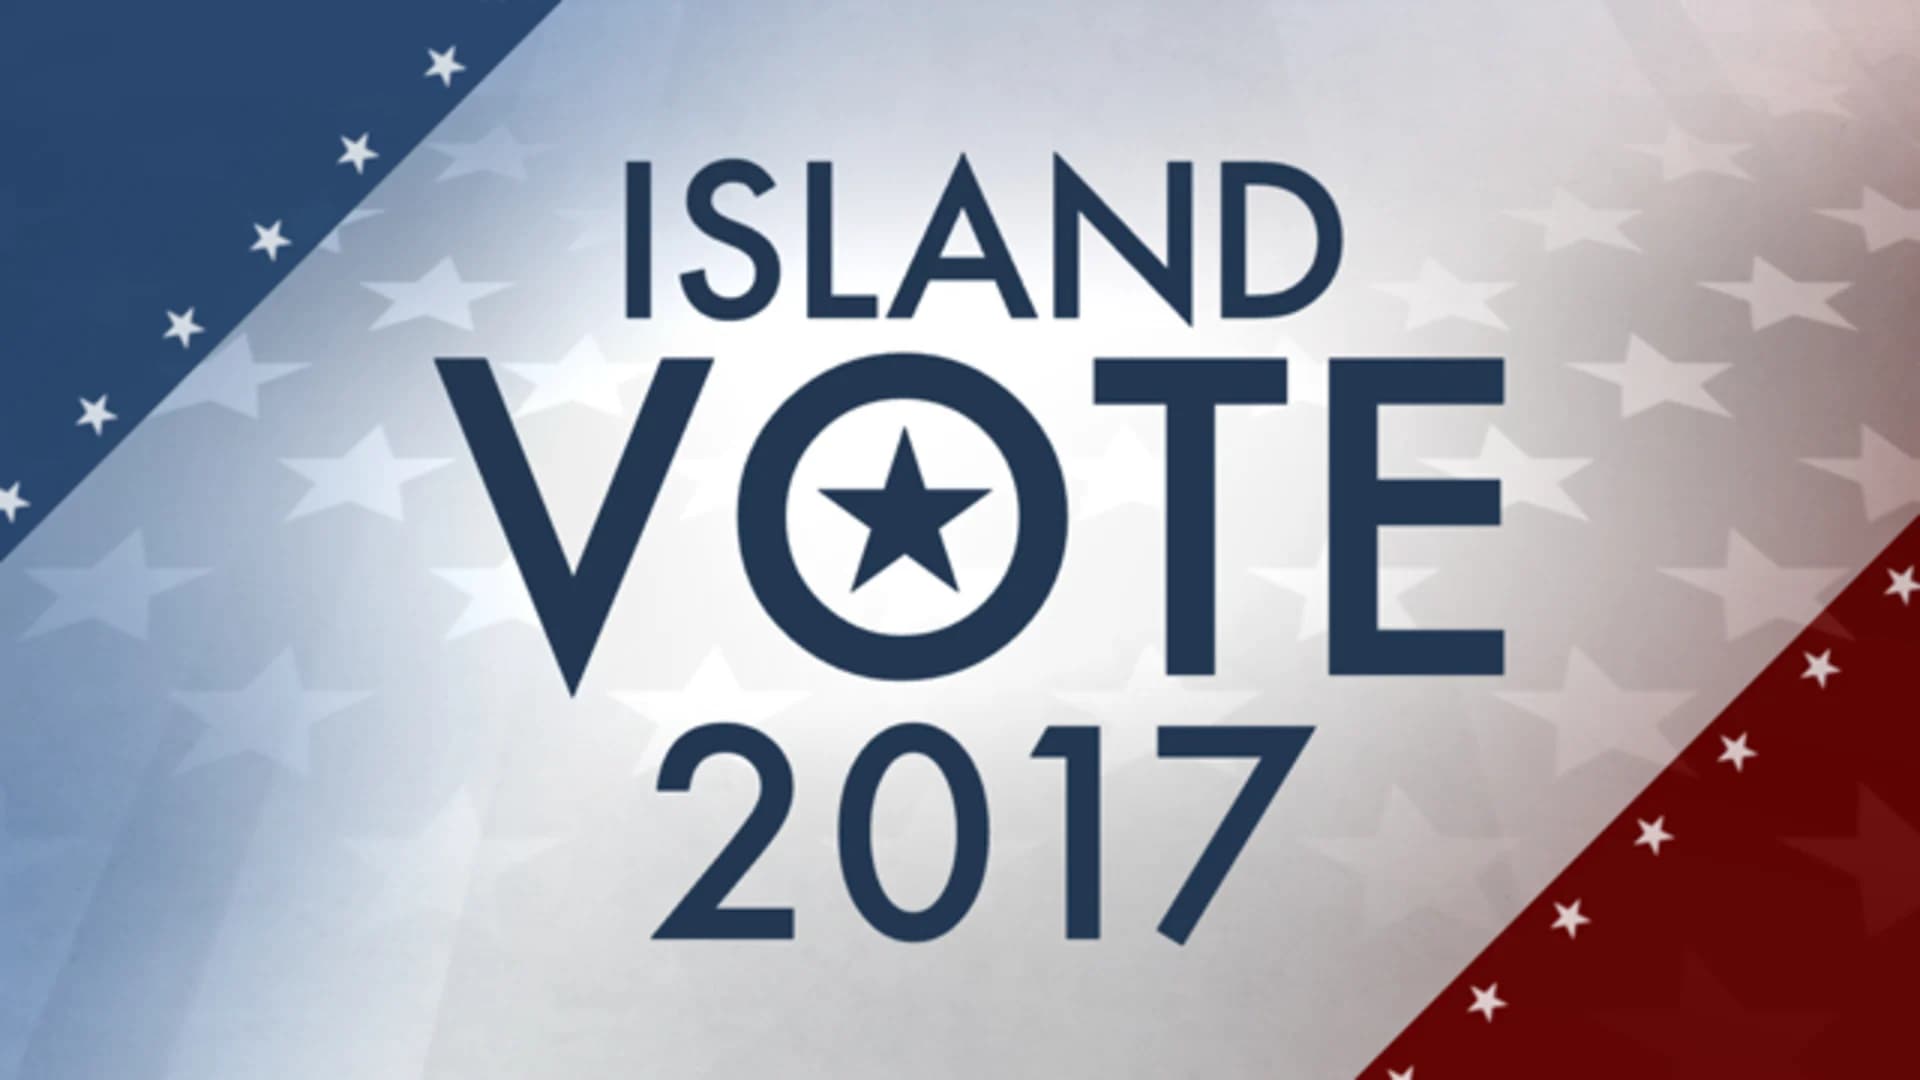 Island Vote 2017: Complete results and coverage